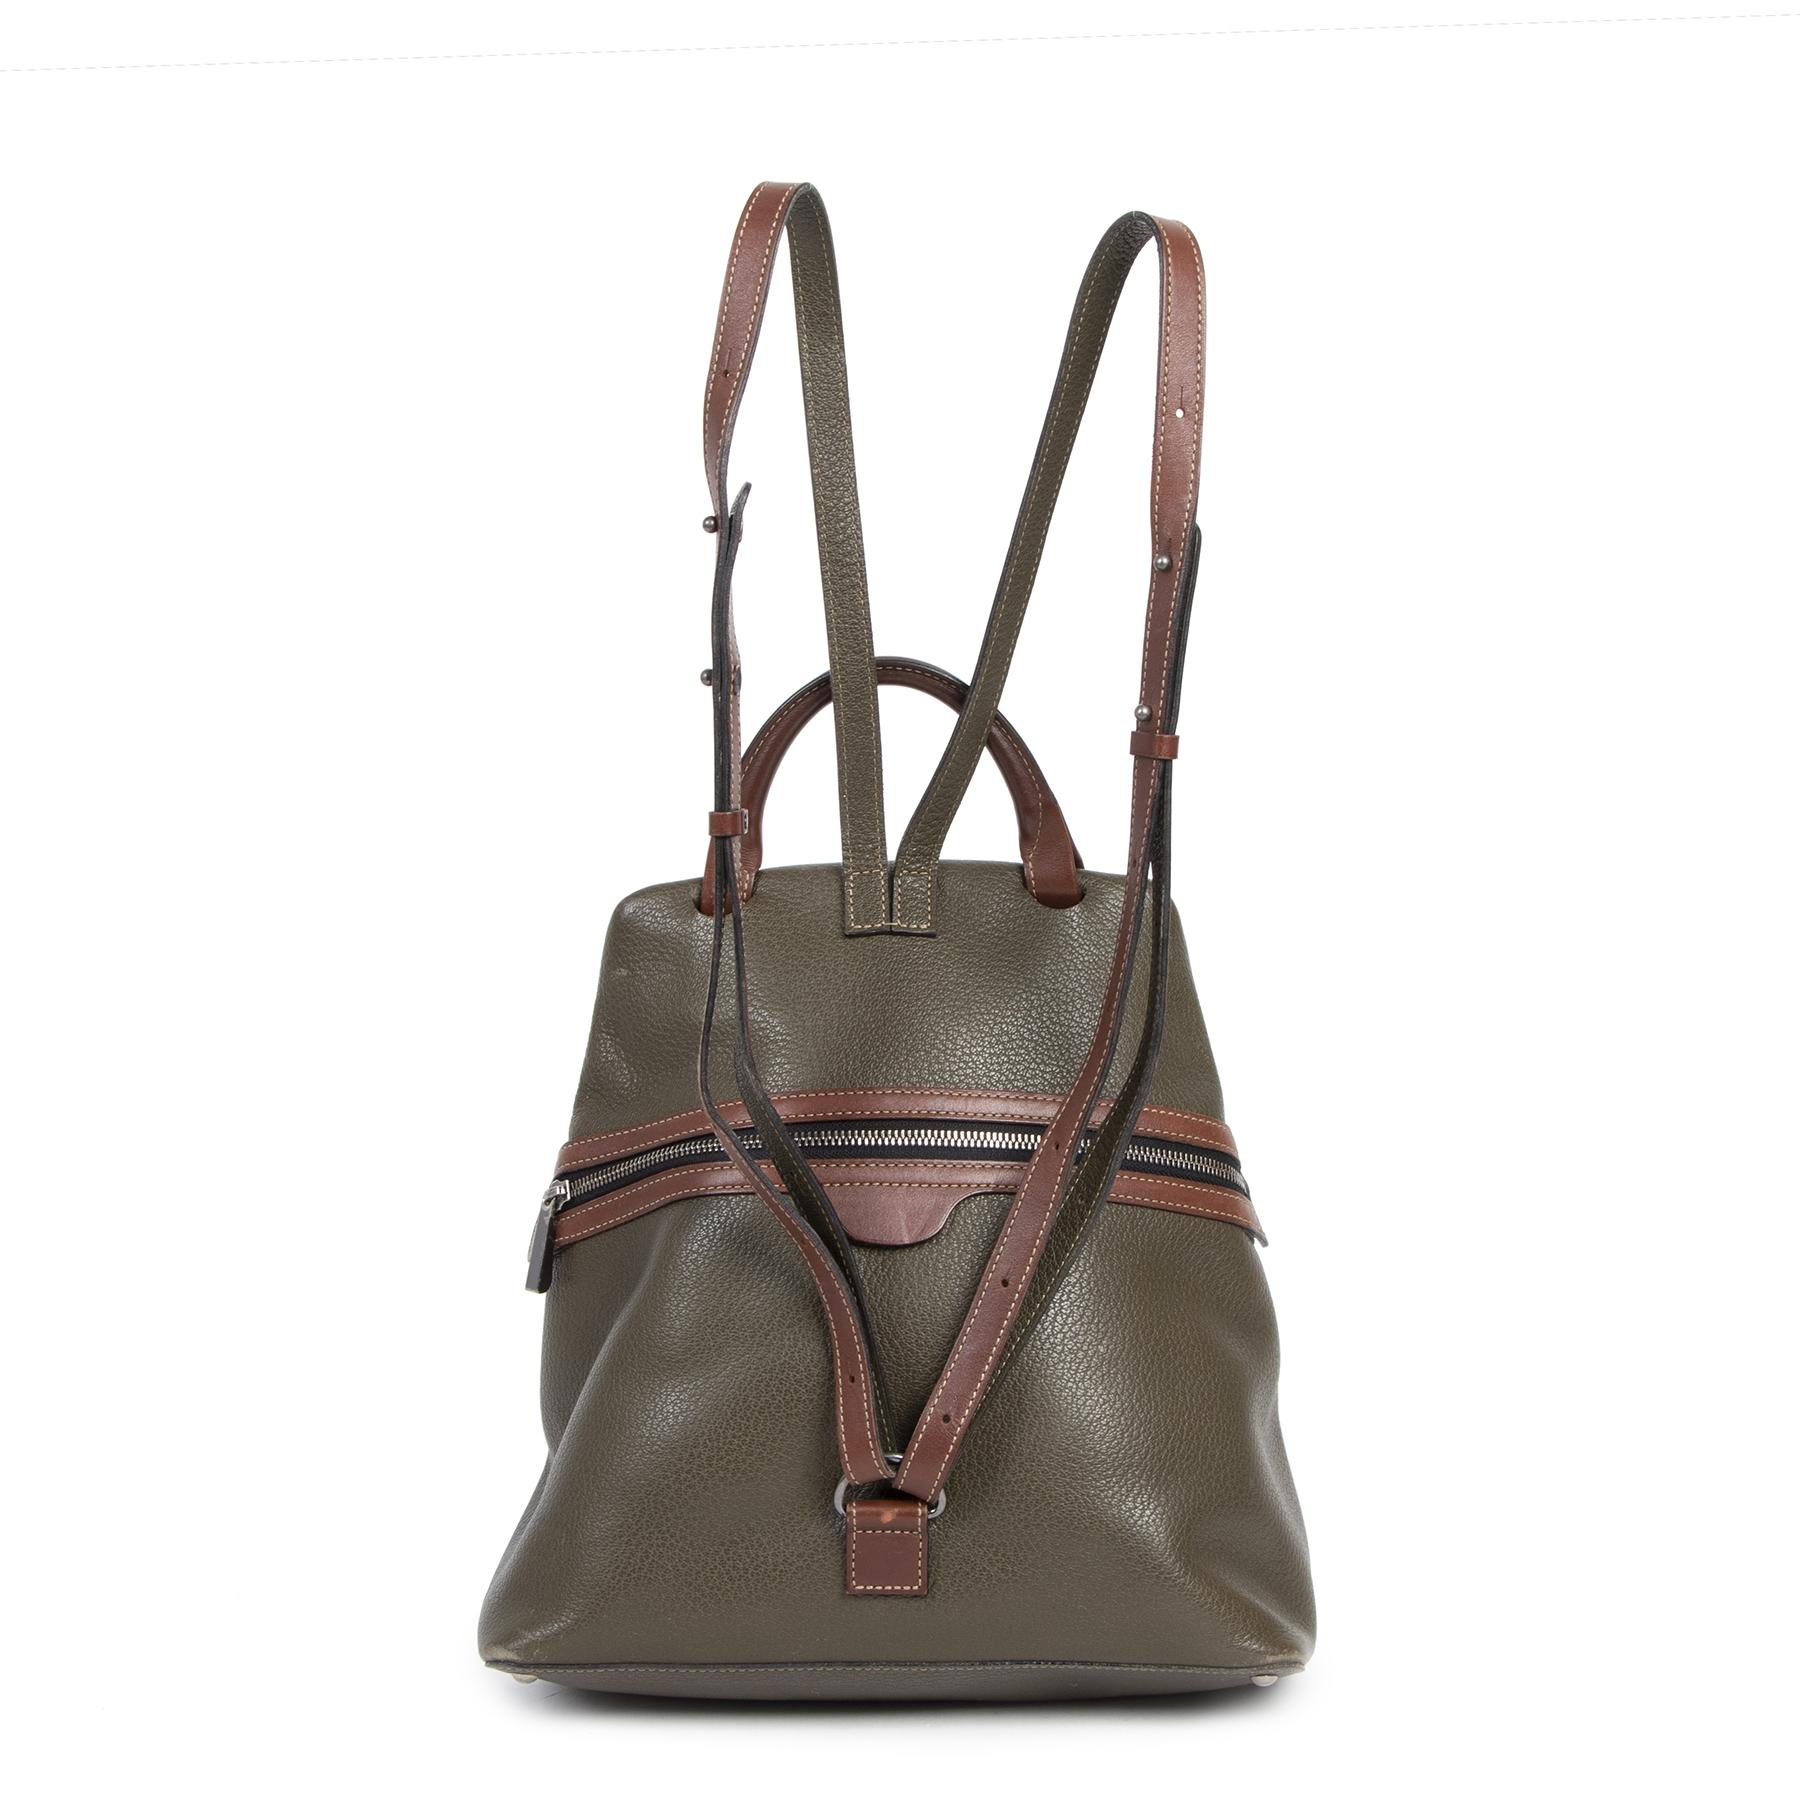 Good preloved condition

Deux De Delvaux Green Backpack

This beautiful and elegant Deux De Delvaux backpack is perfect to take on a citytrip with you. The backpack is crafted in green leather and features brown leather handles, straps and details.